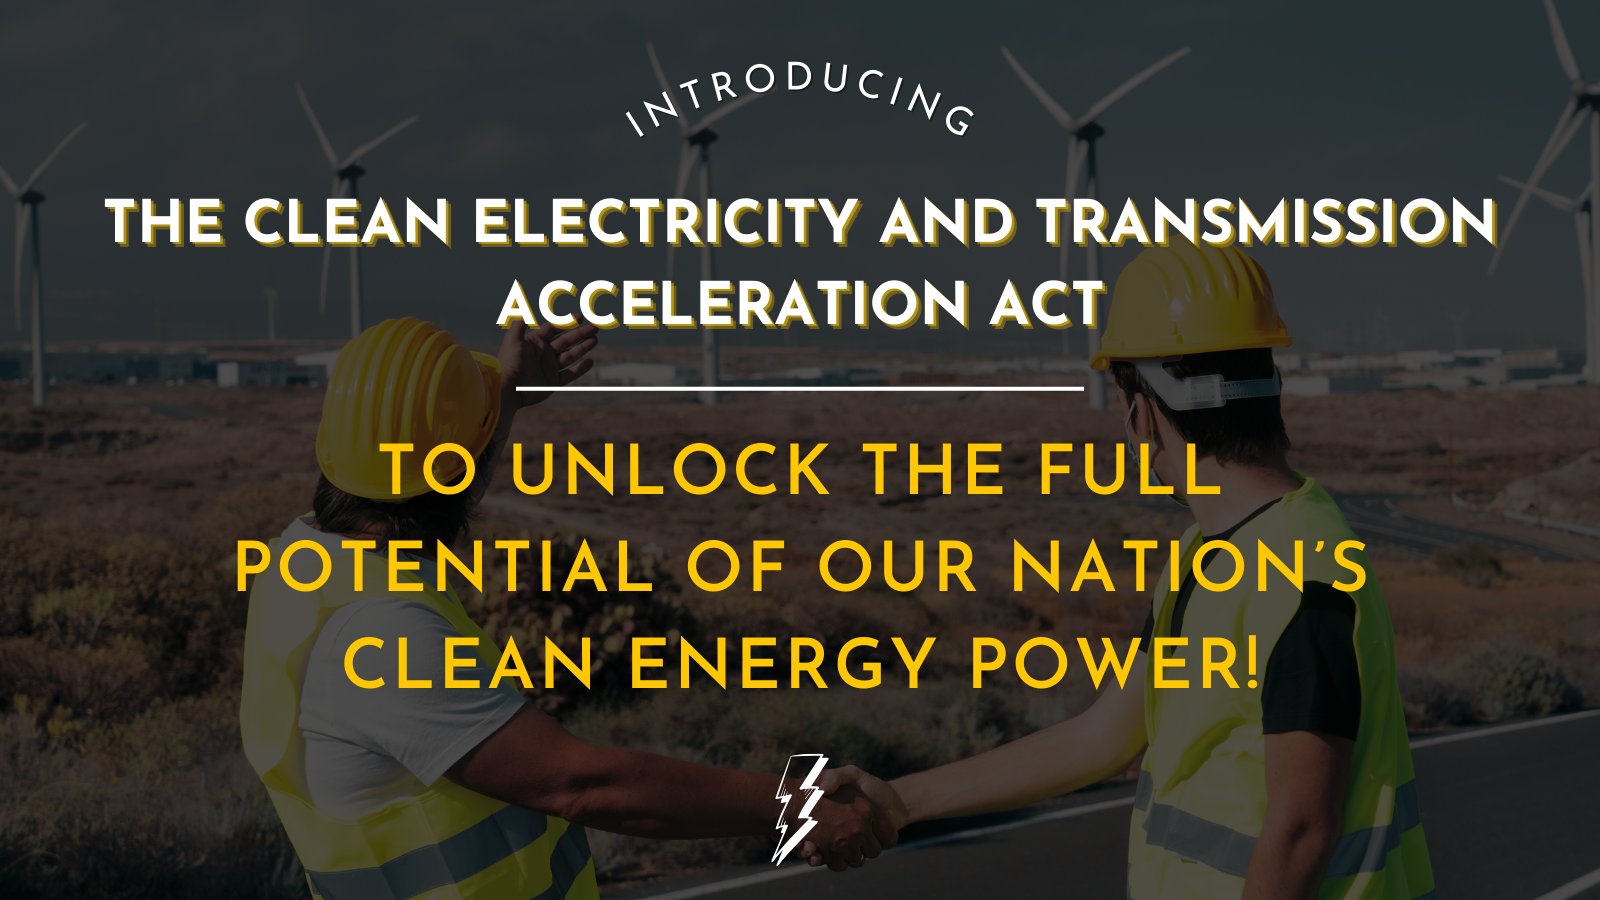 Clean Electricity and Transmission Acceleration (CETA) Act